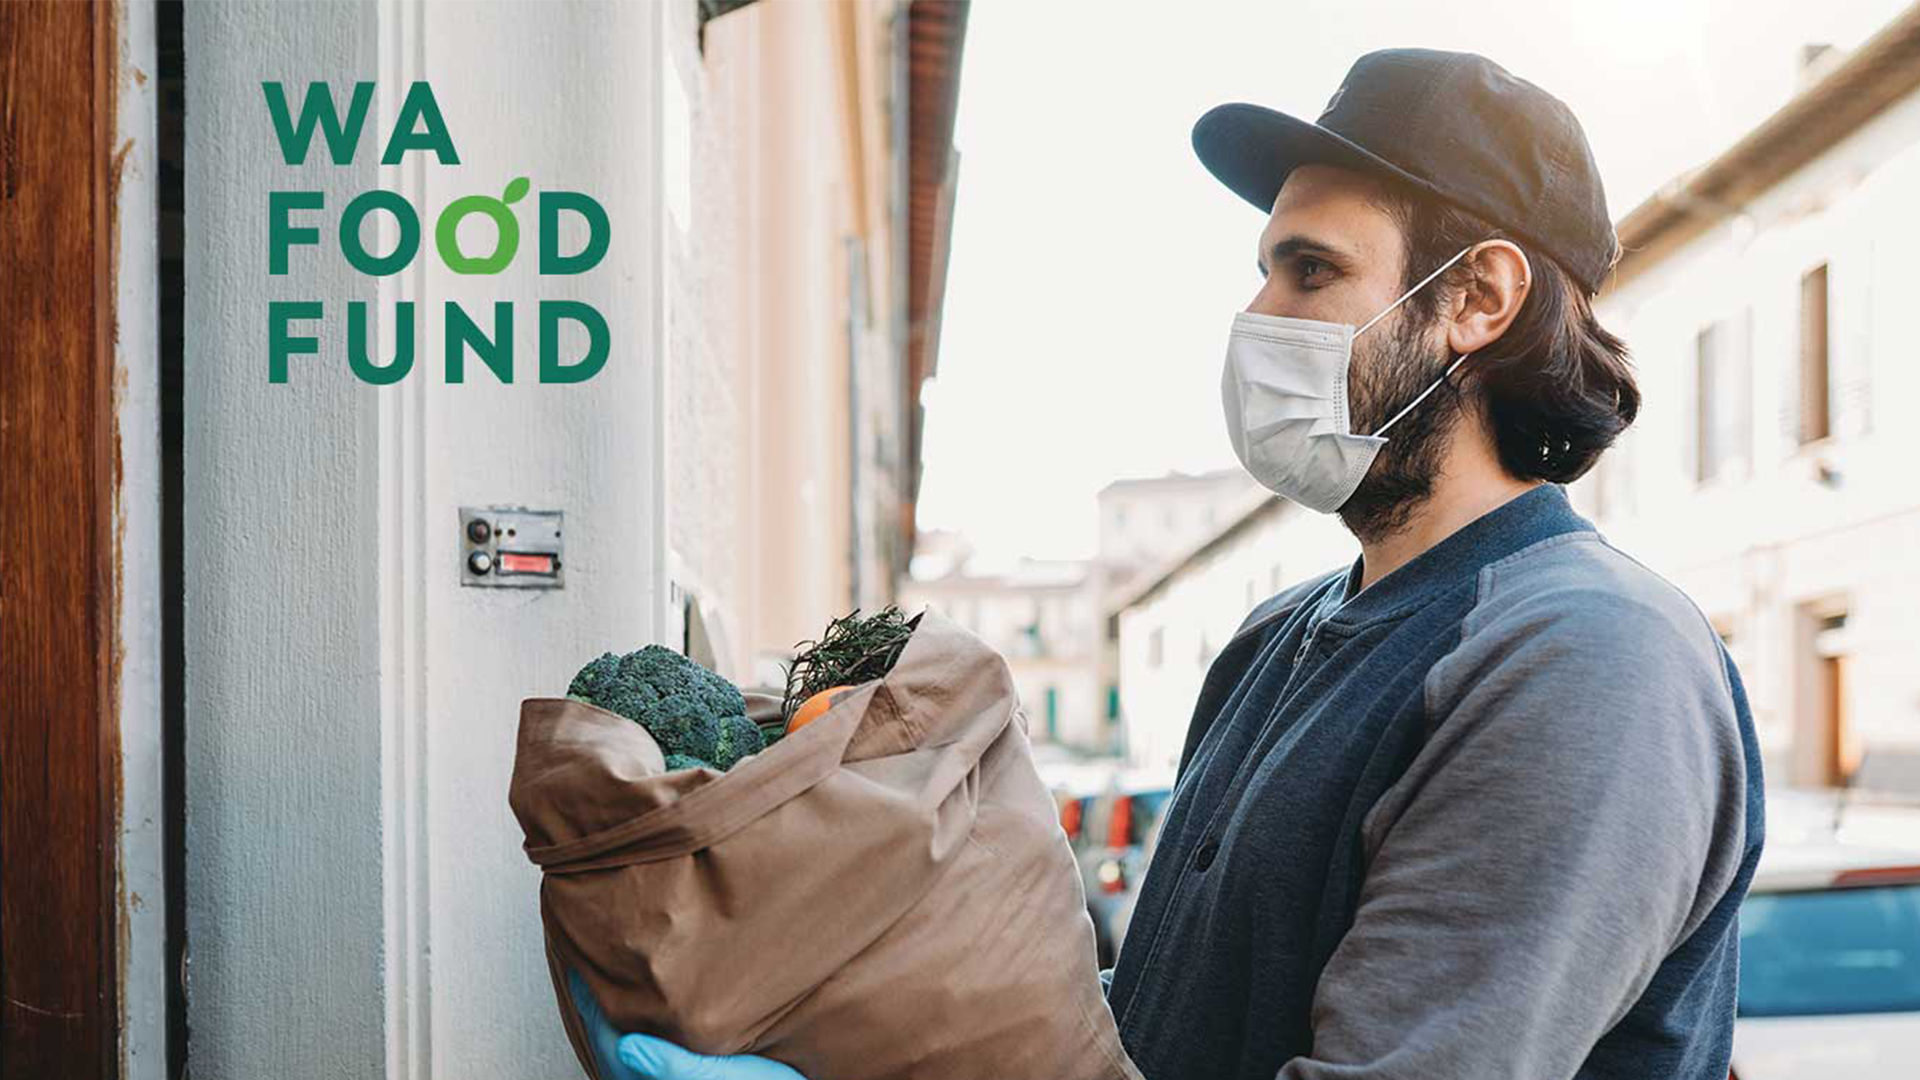 WA Food Fund image with a man in hygiene mask and gloves delivering bag of food standing in a doorway 